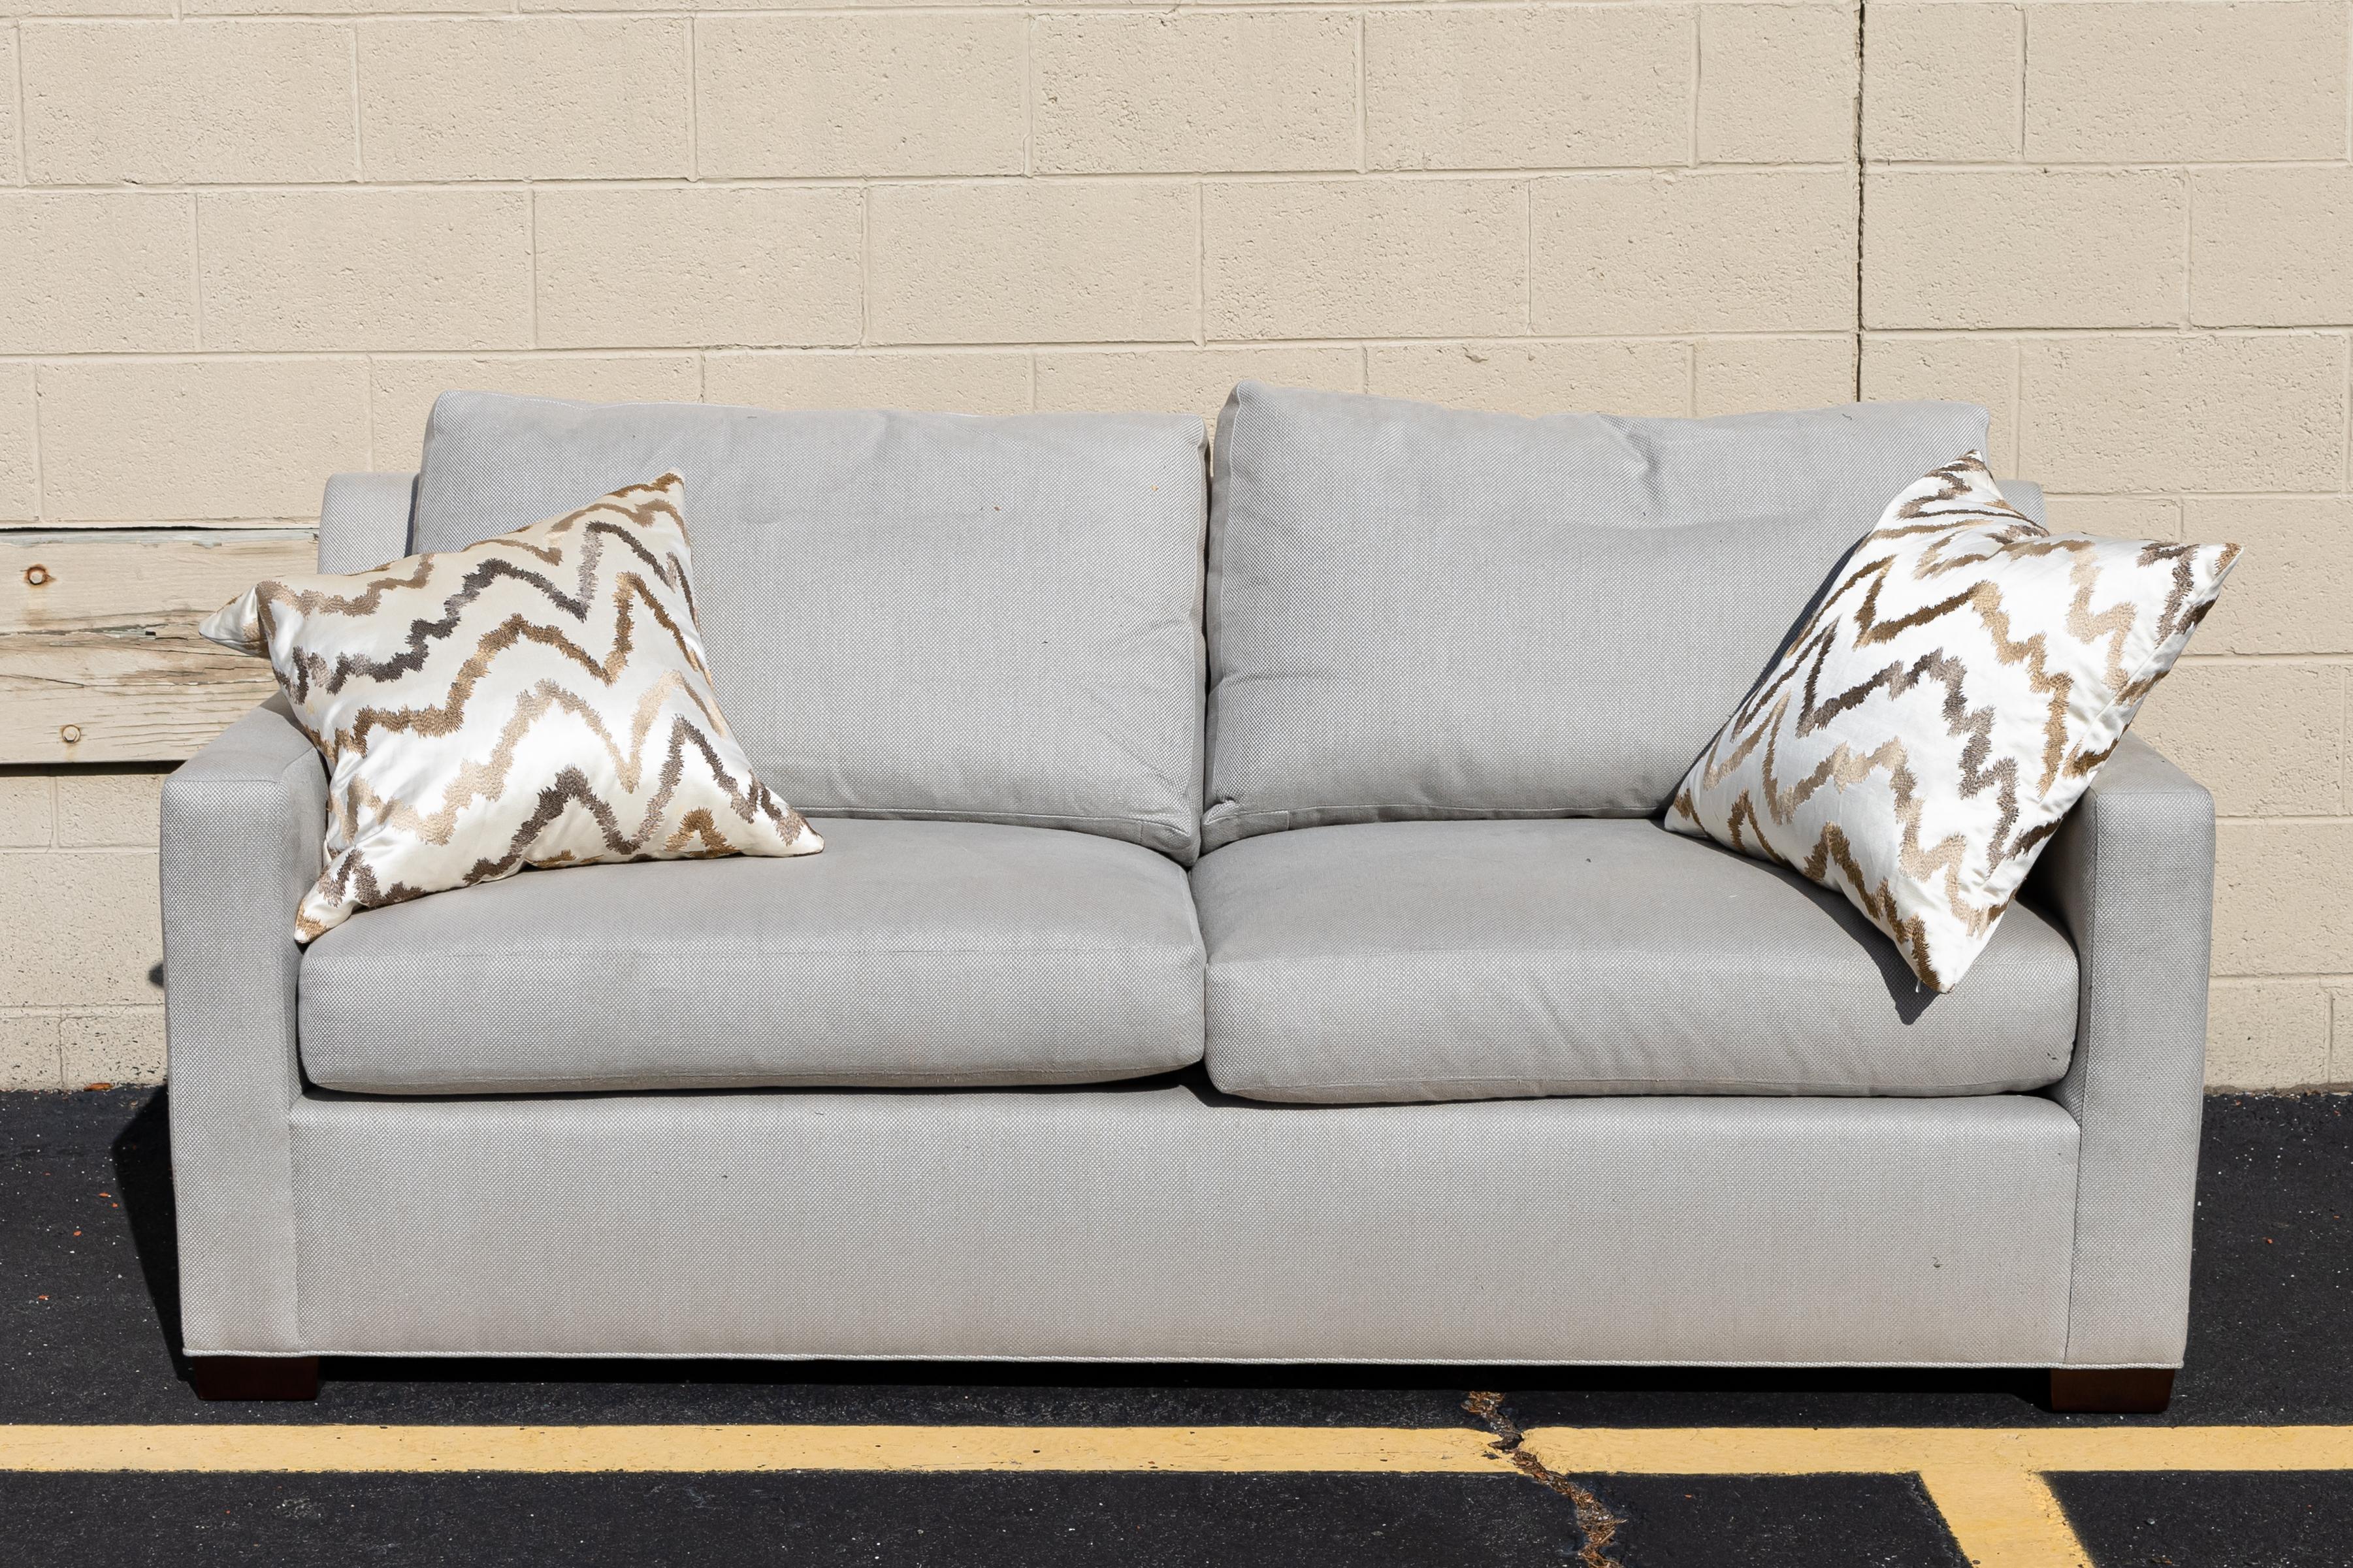 A pair of matching modern contemporary Baker sofa. This sofa comes with matching cushions and pillows. They are removable from the couch. This piece is in very good condition with slight wear on the legs reasonable for used condition. The sofa